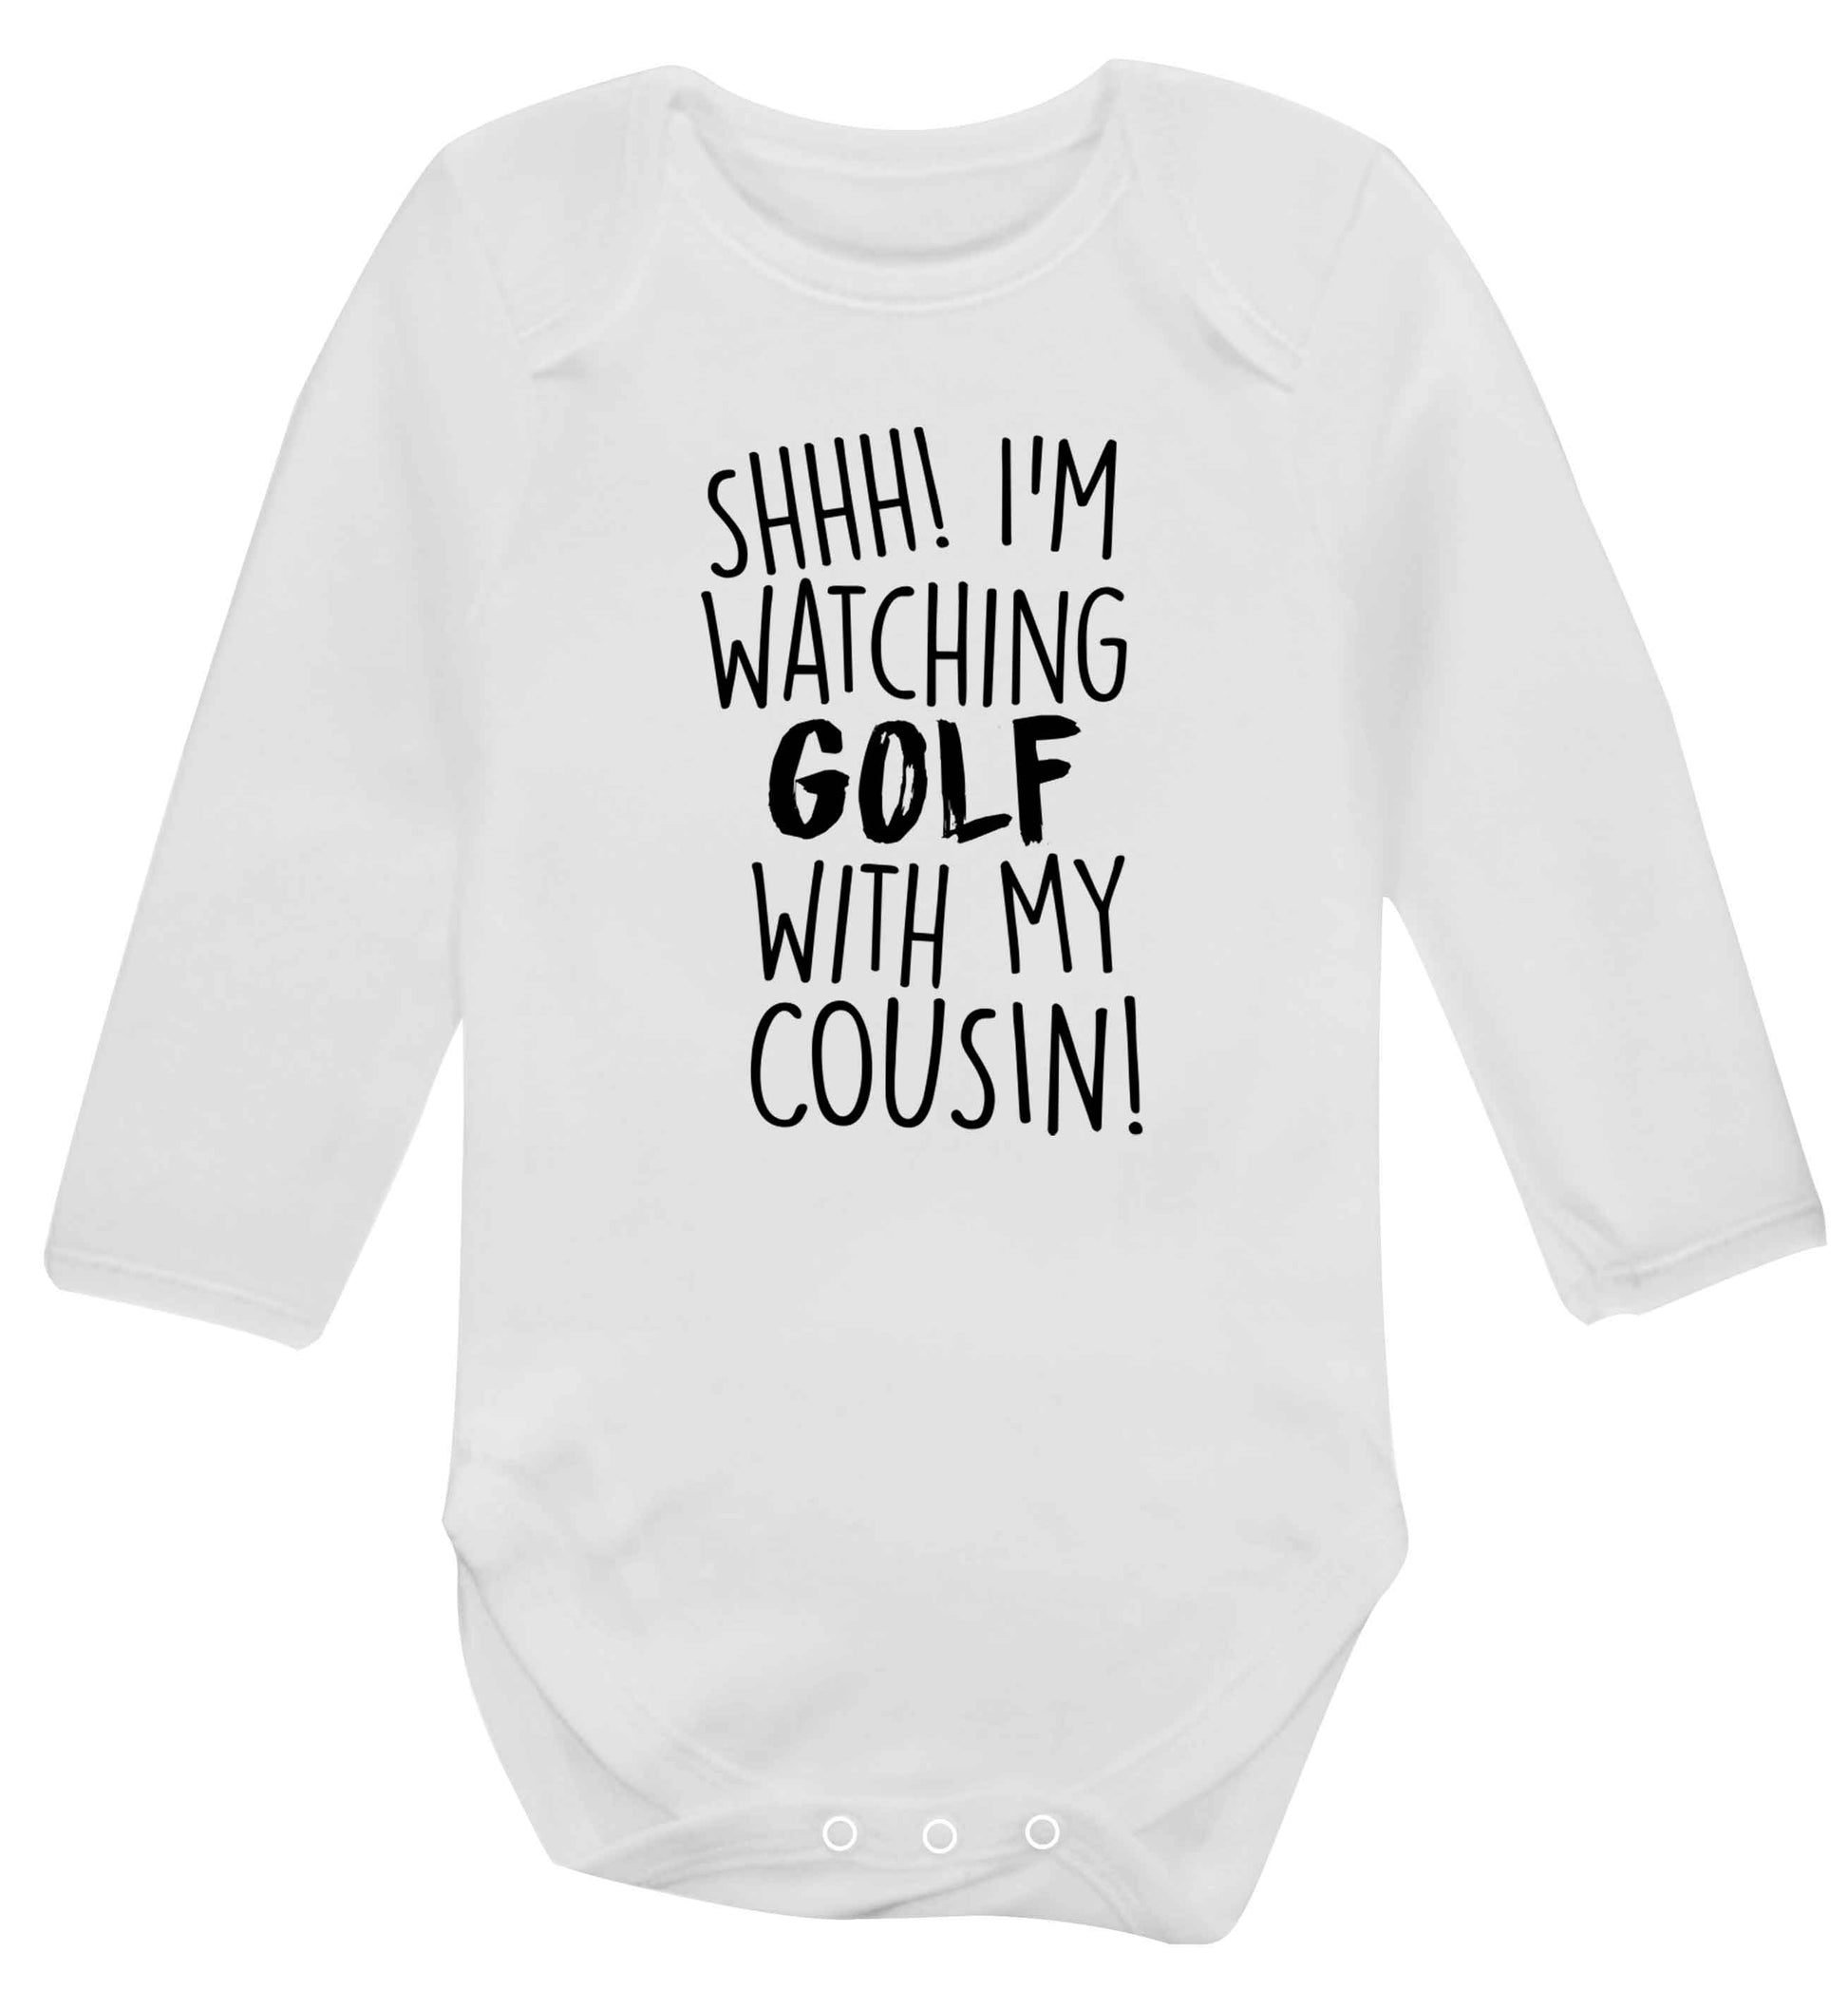 Shh I'm watching golf with my cousin Baby Vest long sleeved white 6-12 months